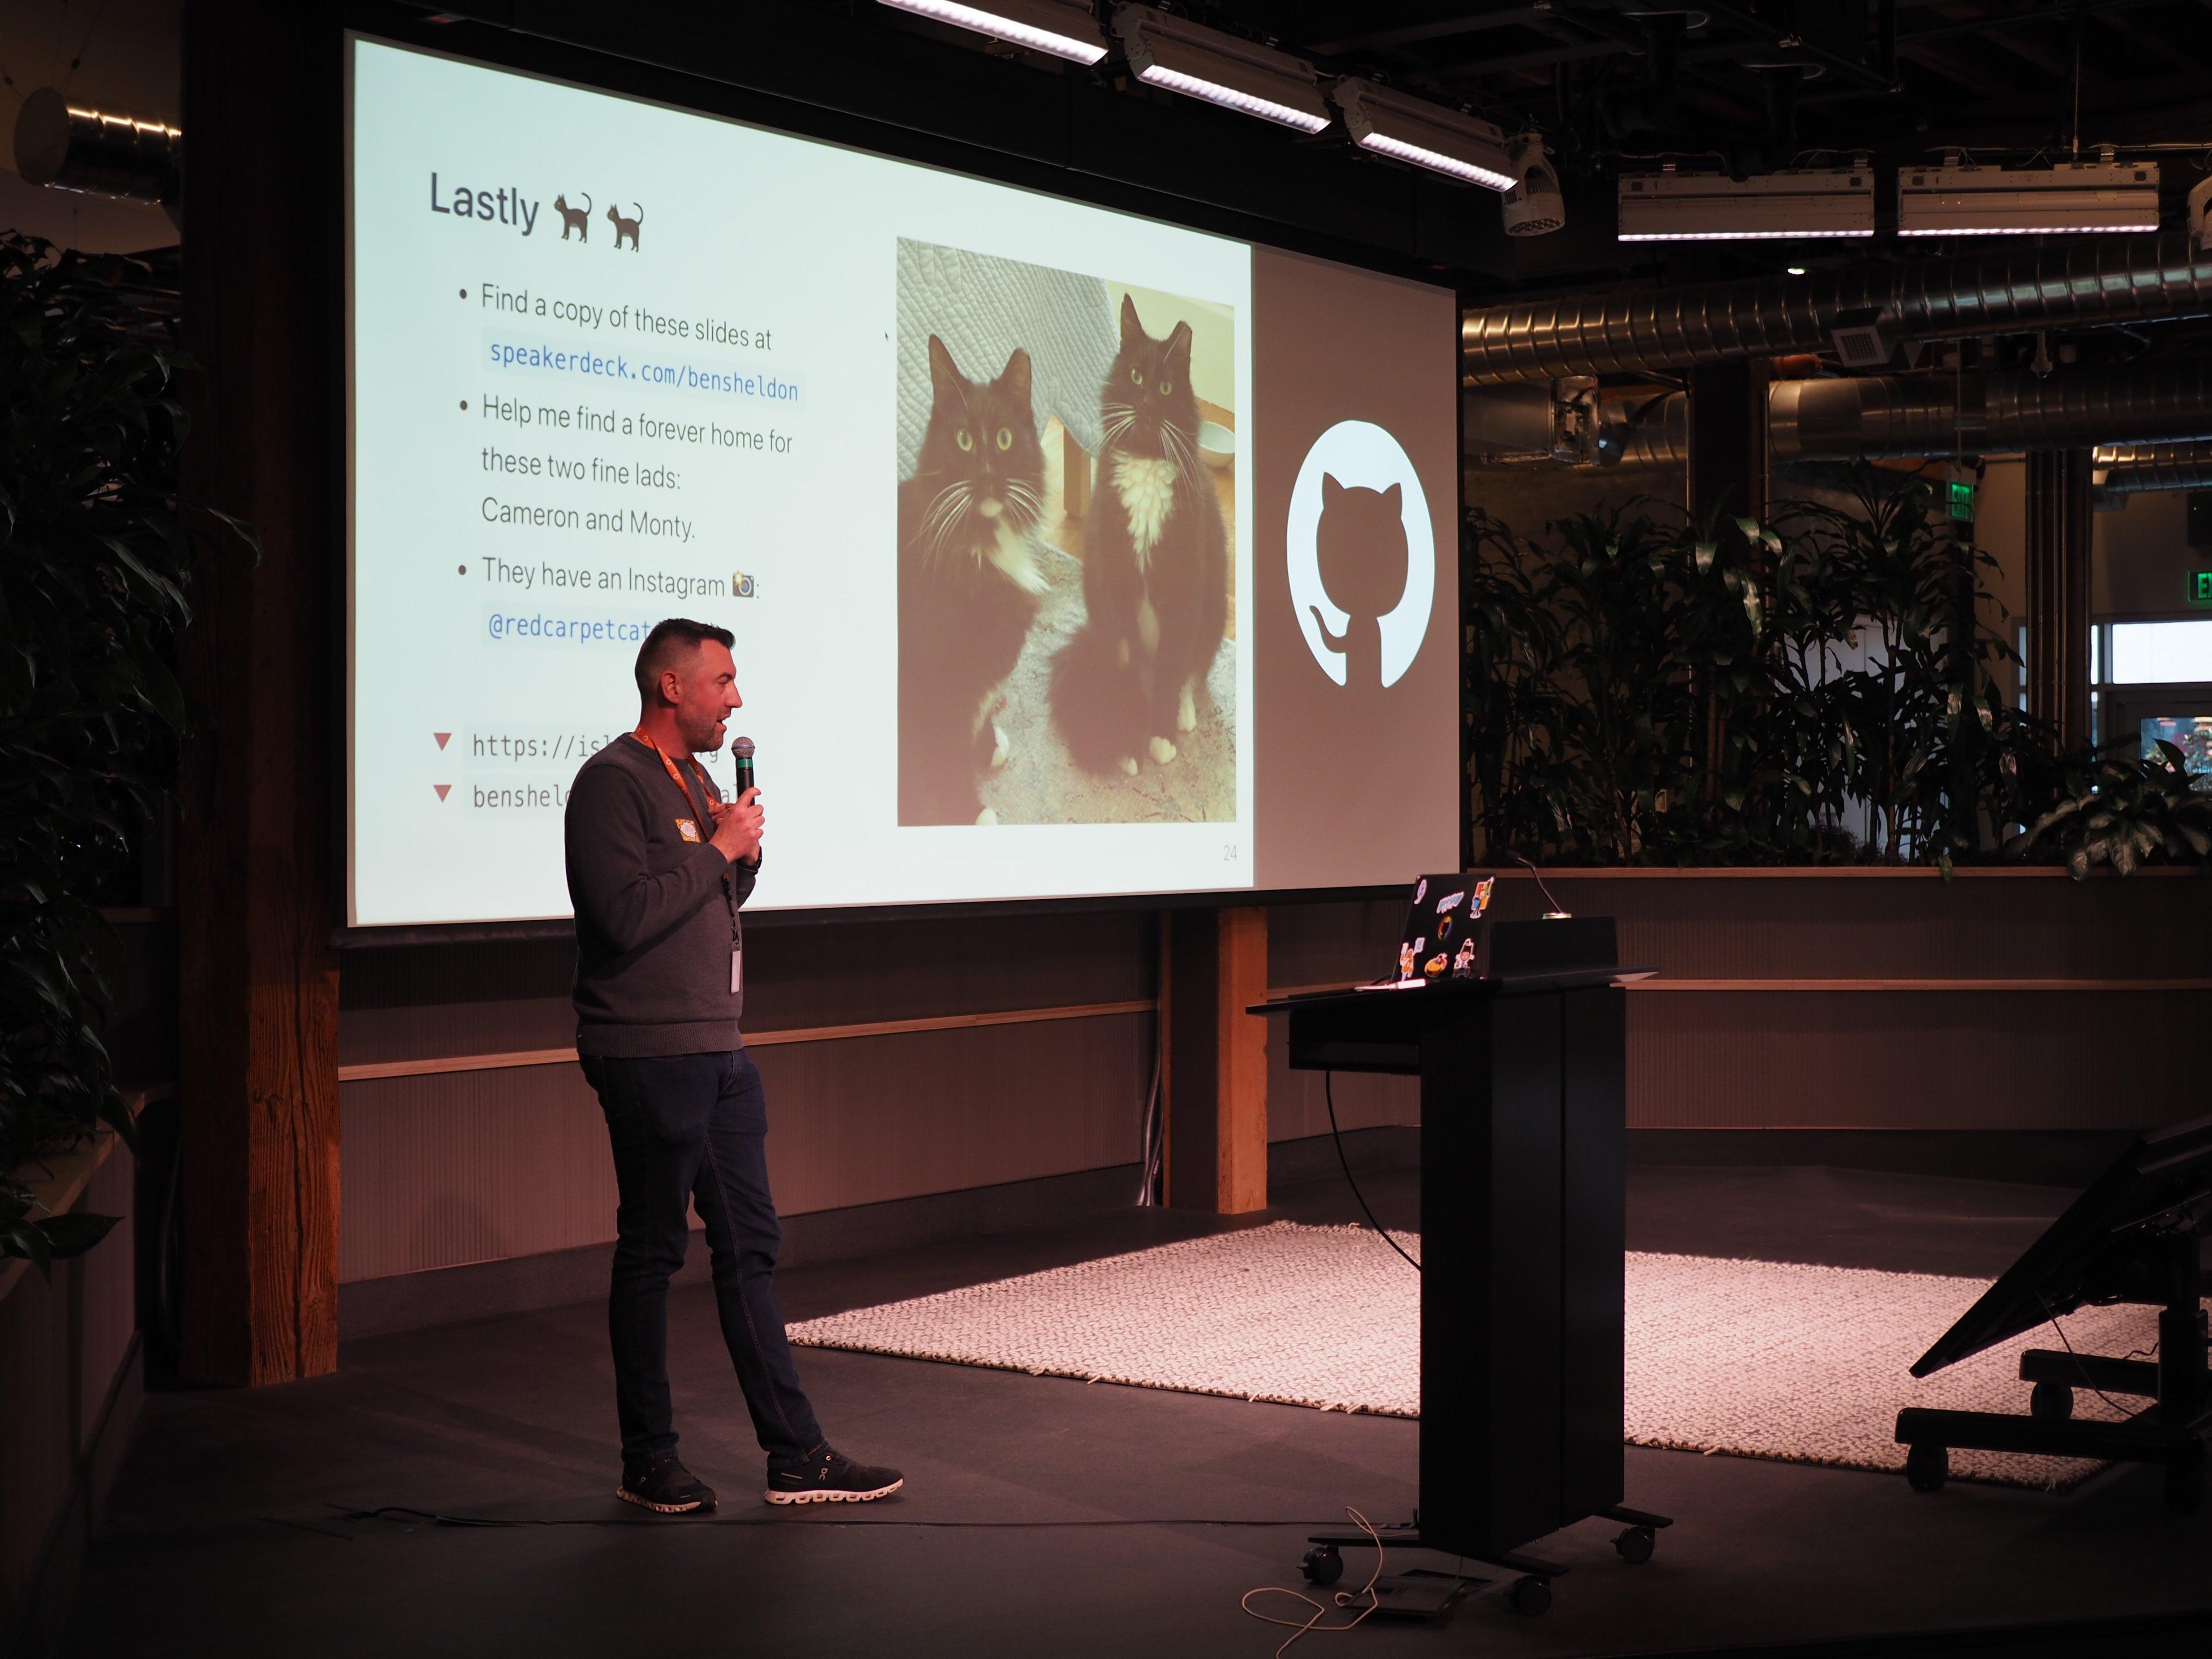 Me standing on a small stage in front of a slide with 2 adoptable cats and the GitHub logo